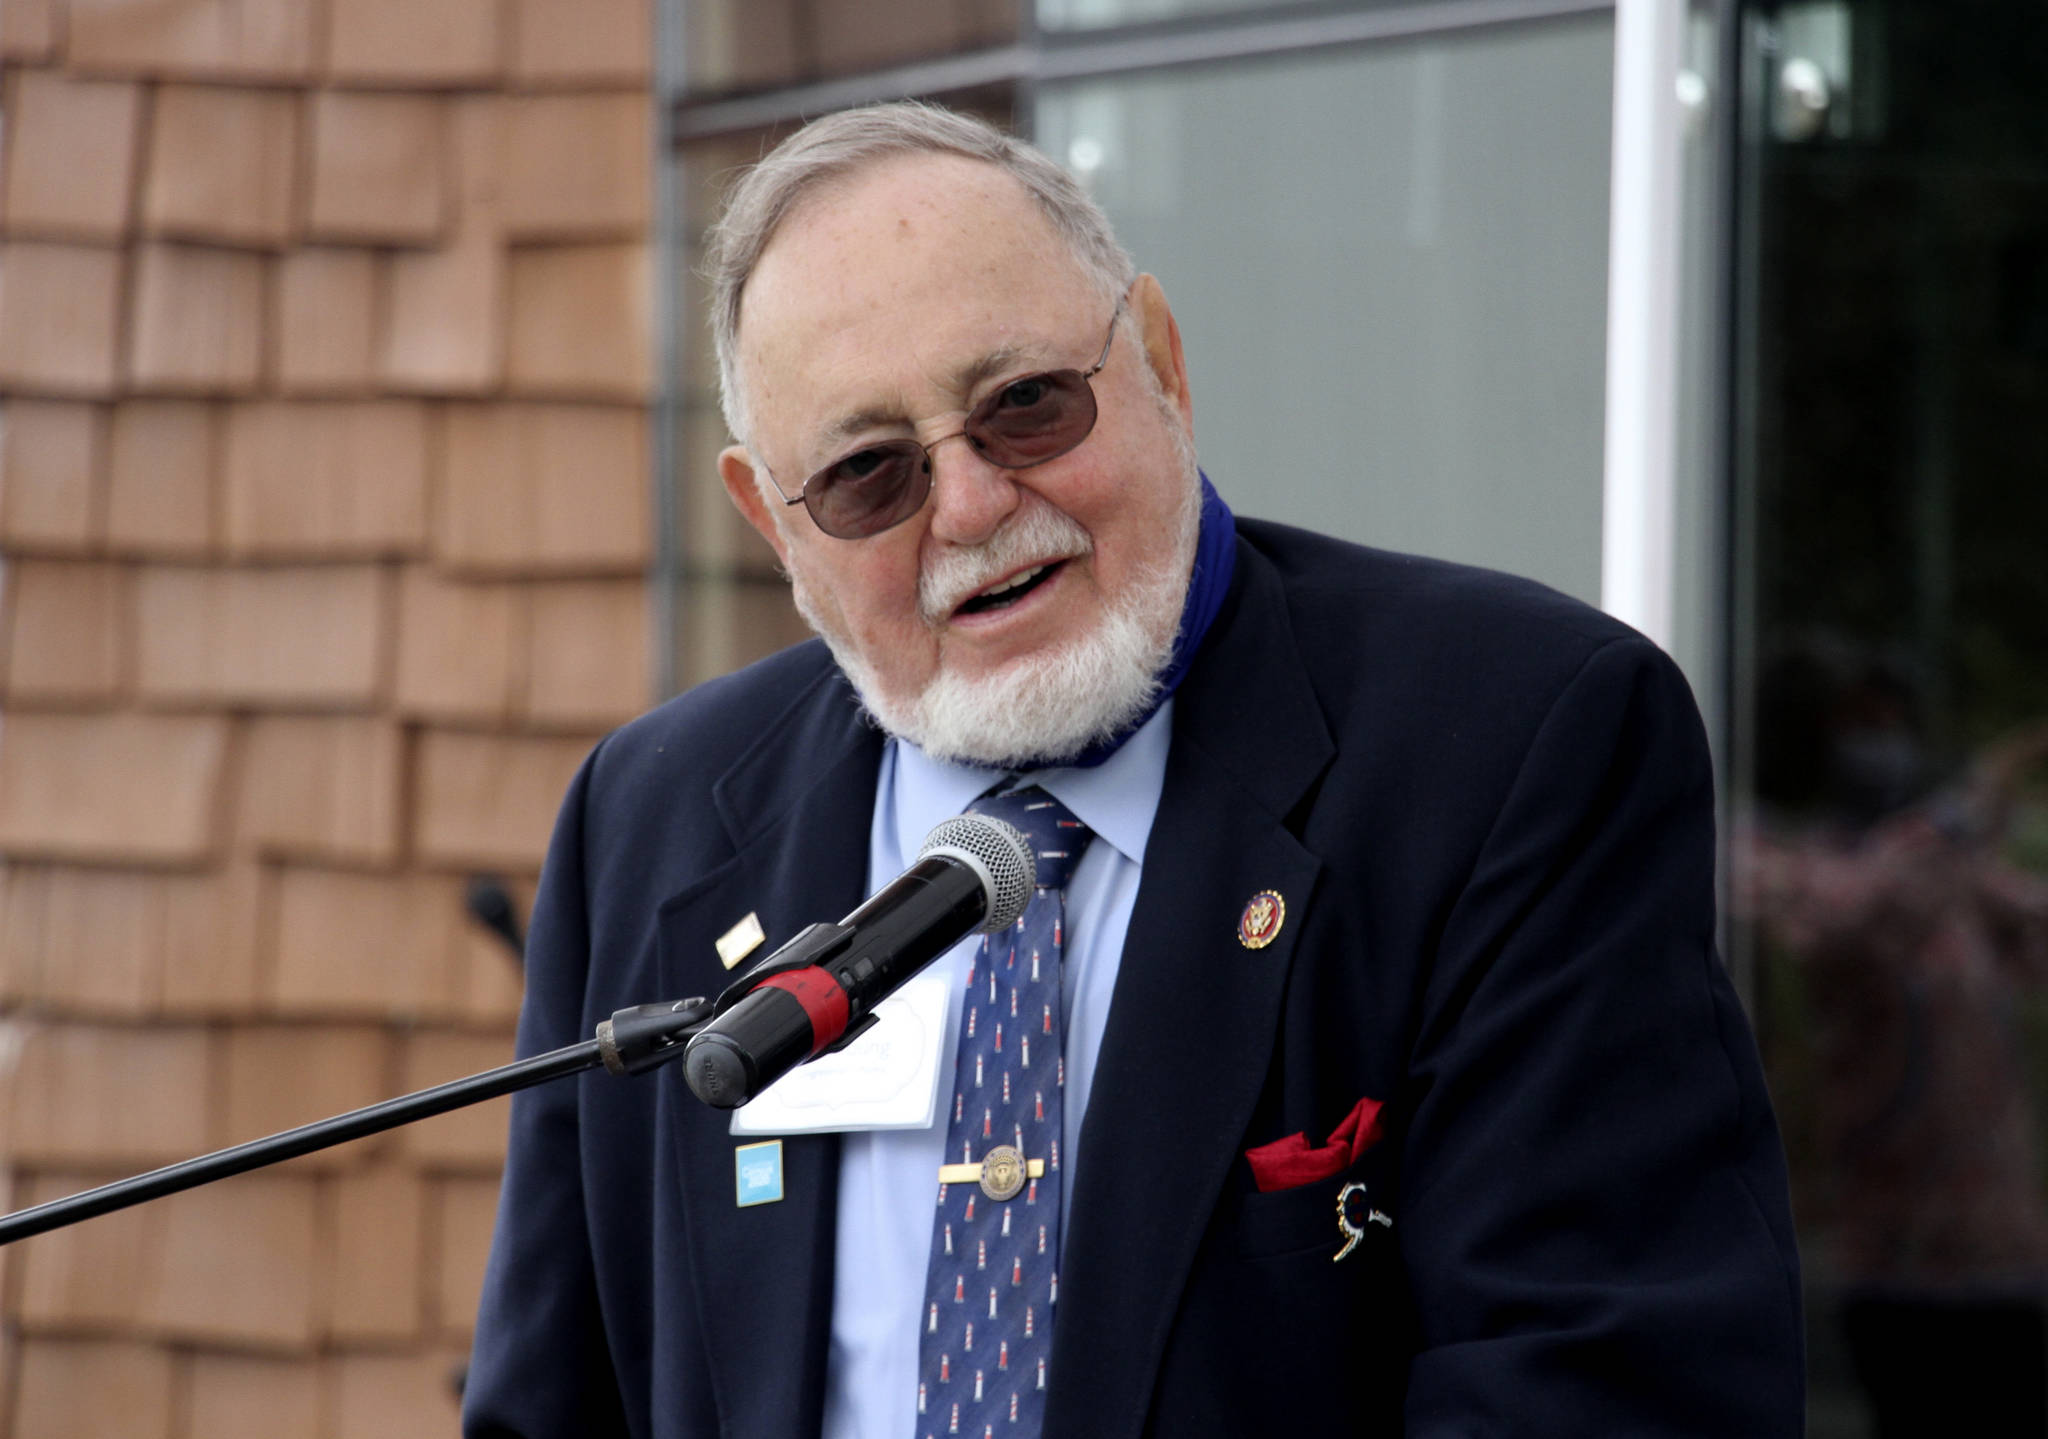 In this Aug. 26, 2020, photo, U.S. Rep. Don Young, an Alaska Republican, speaks during a ceremony in Anchorage, Alaska, celebrating the opening of a Lady Justice Task Force cold case office which will specialize in cases involving missing or murdered Indigenous women. Young announced Thursday, Nov. 12, 2020, on Twitter that he has tested positive for COVID-19. (AP Photo/Mark Thiessen)